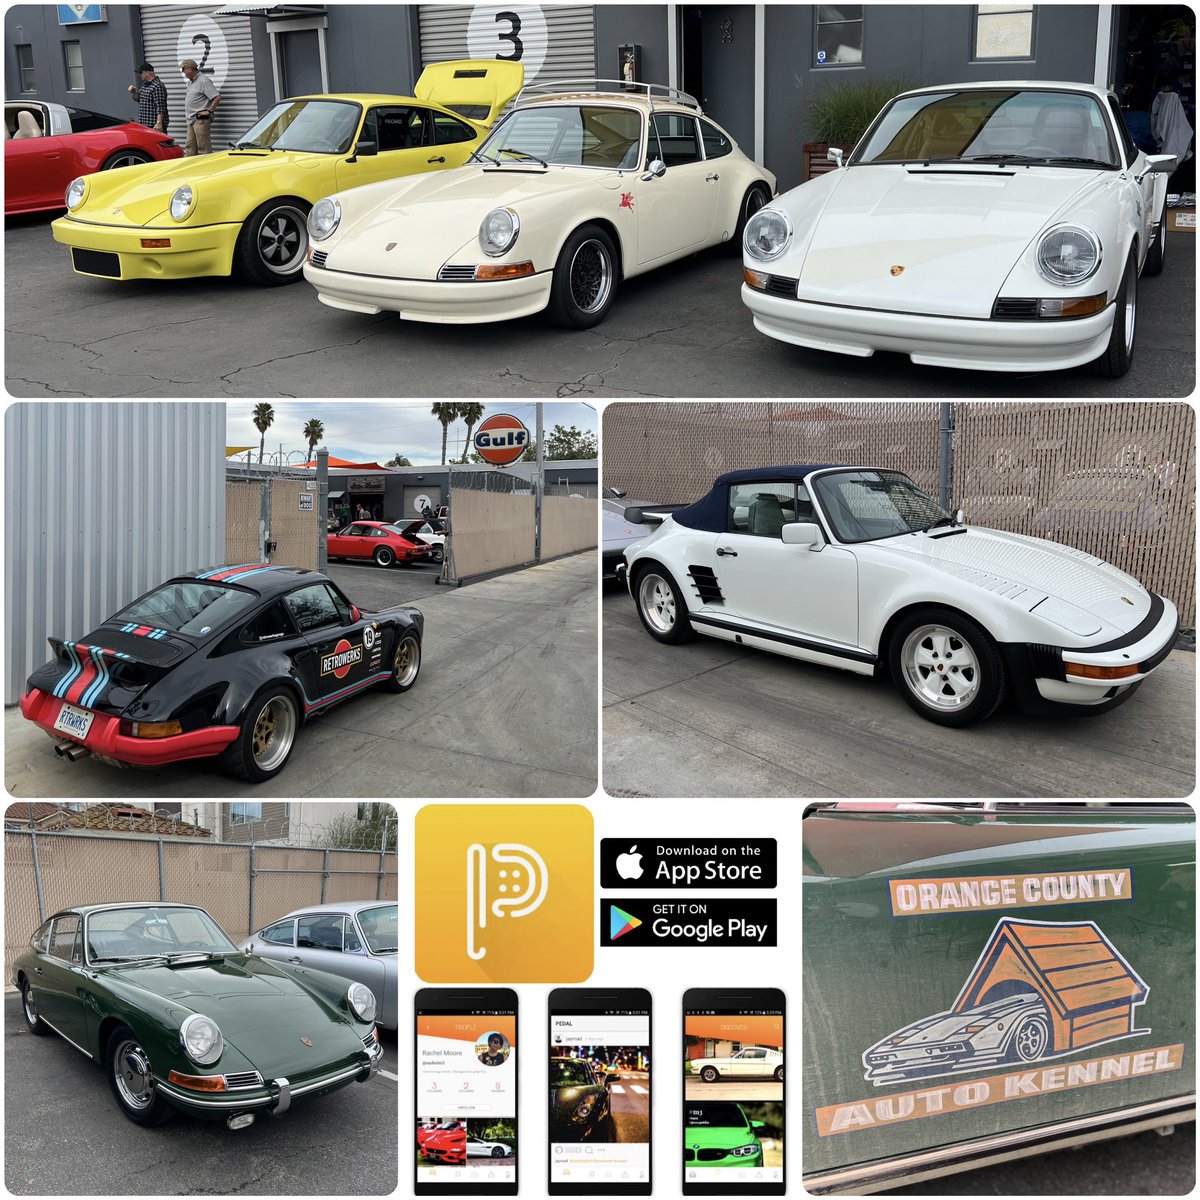 🔶 @AutoKennel open house ~ Porsche Lit Week in SoCal
🔶 See more on PEDAL - Free in app stores

#autokennel #costamesa #porsche #porsche356 #porsche911 #porsche911s #porsche911turbo #porscheclassic #porschemoments #porschepassion #porscheclub #germancars #lalitweek #pedaltheapp